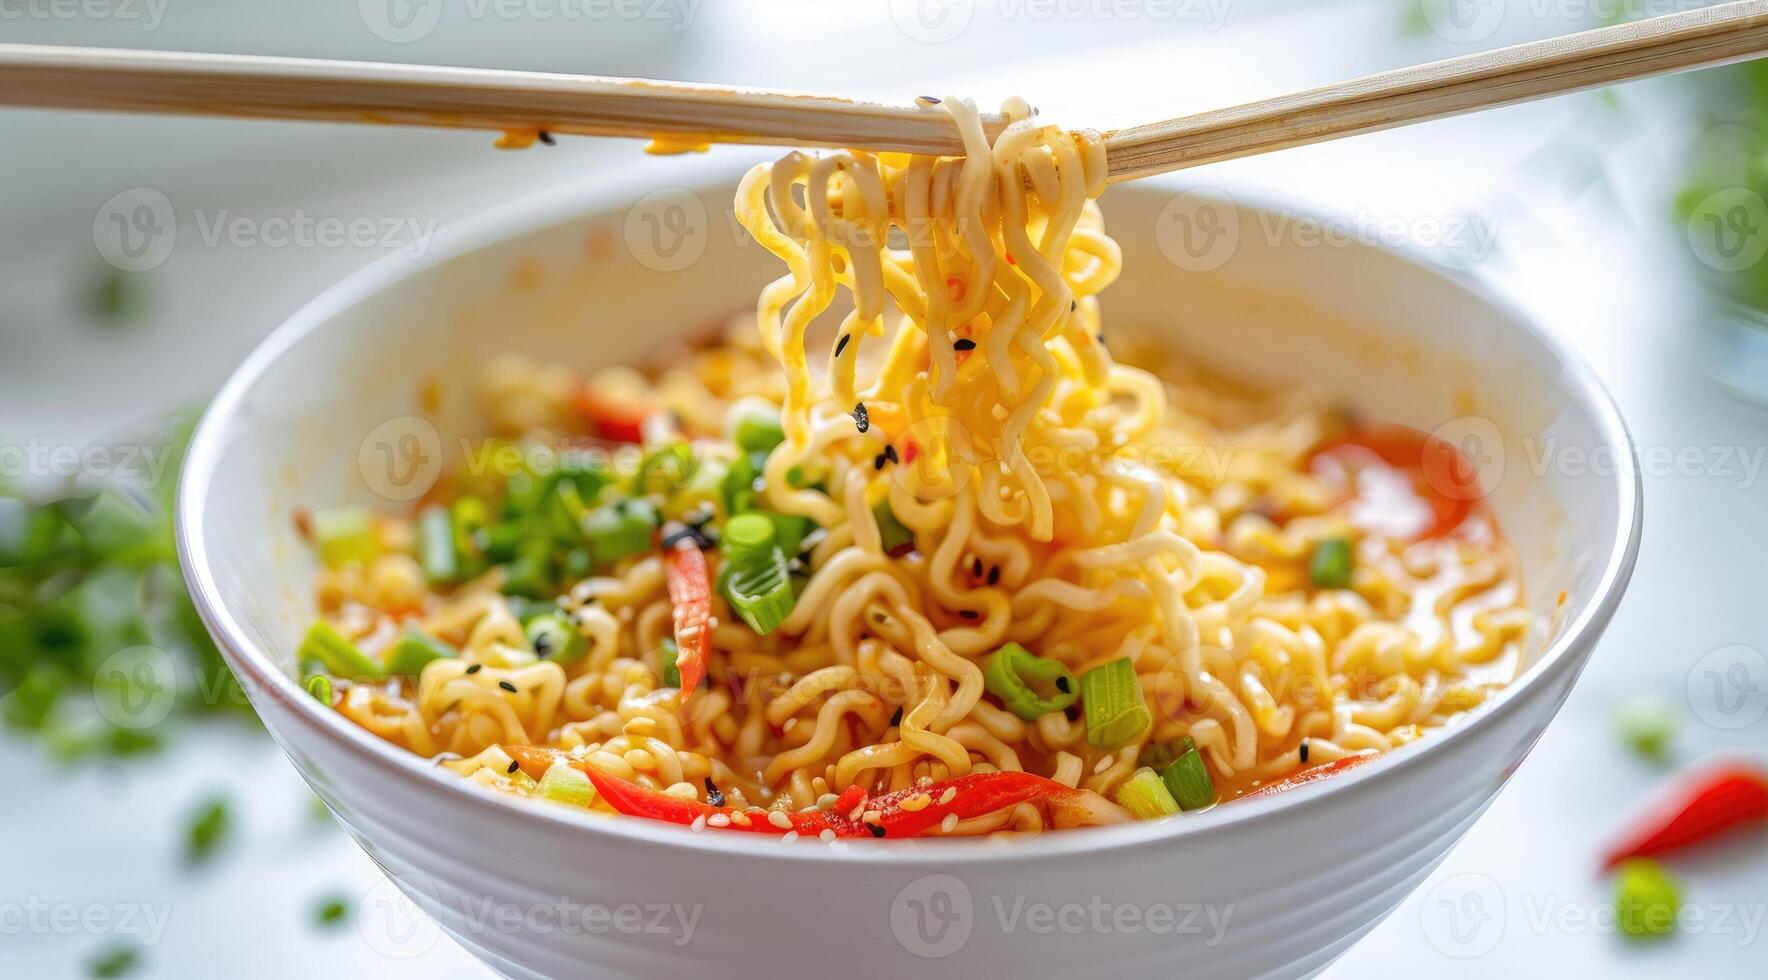 Cooked instant noodles sprinkled with spices, vegetables, herbs. photo